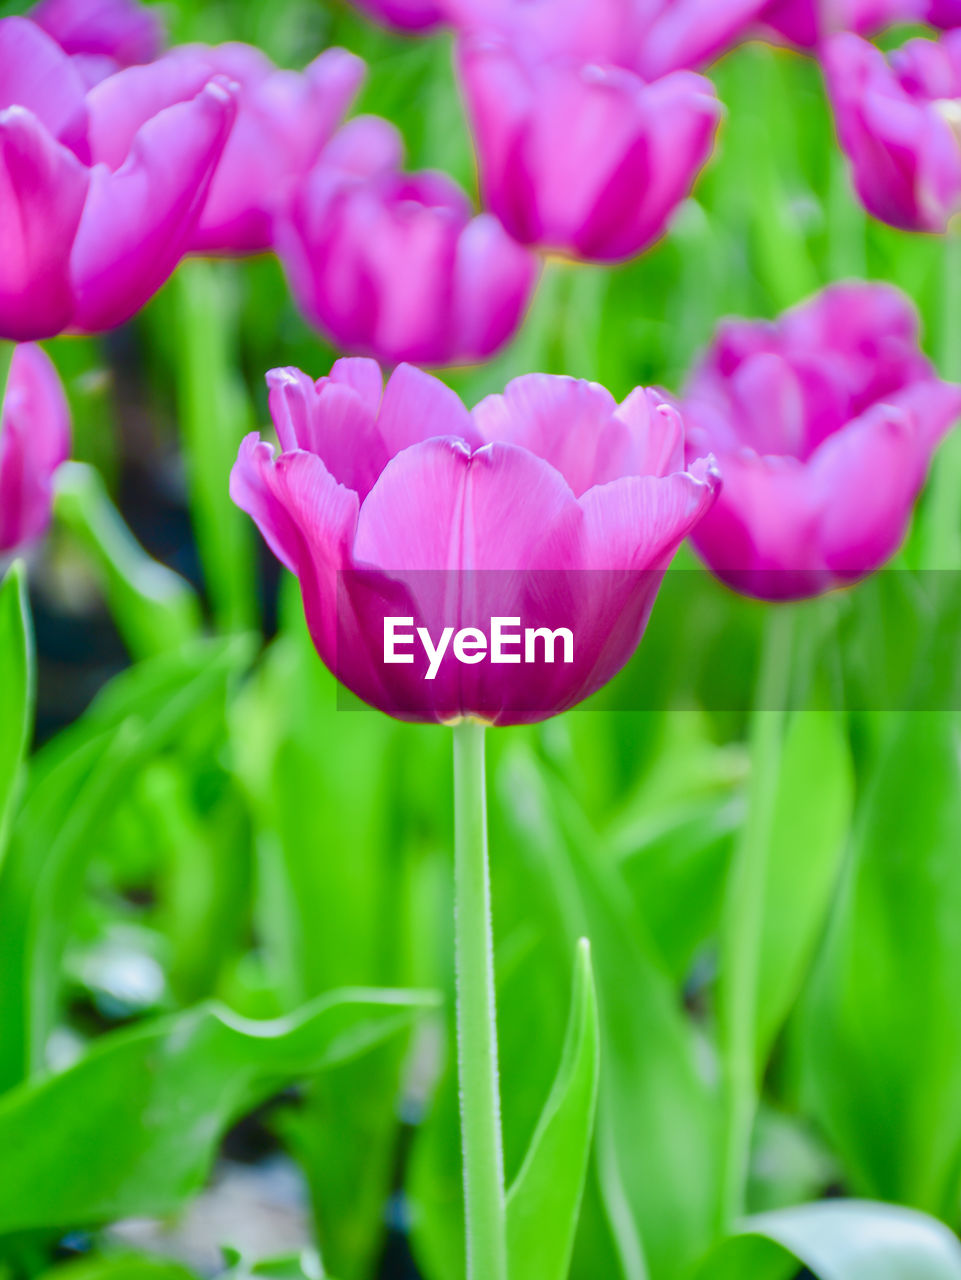 plant, flower, flowering plant, freshness, beauty in nature, pink, close-up, petal, nature, growth, tulip, fragility, flower head, plant part, leaf, green, inflorescence, no people, springtime, focus on foreground, outdoors, blossom, purple, selective focus, plant stem, vibrant color, day, flowerbed, magenta